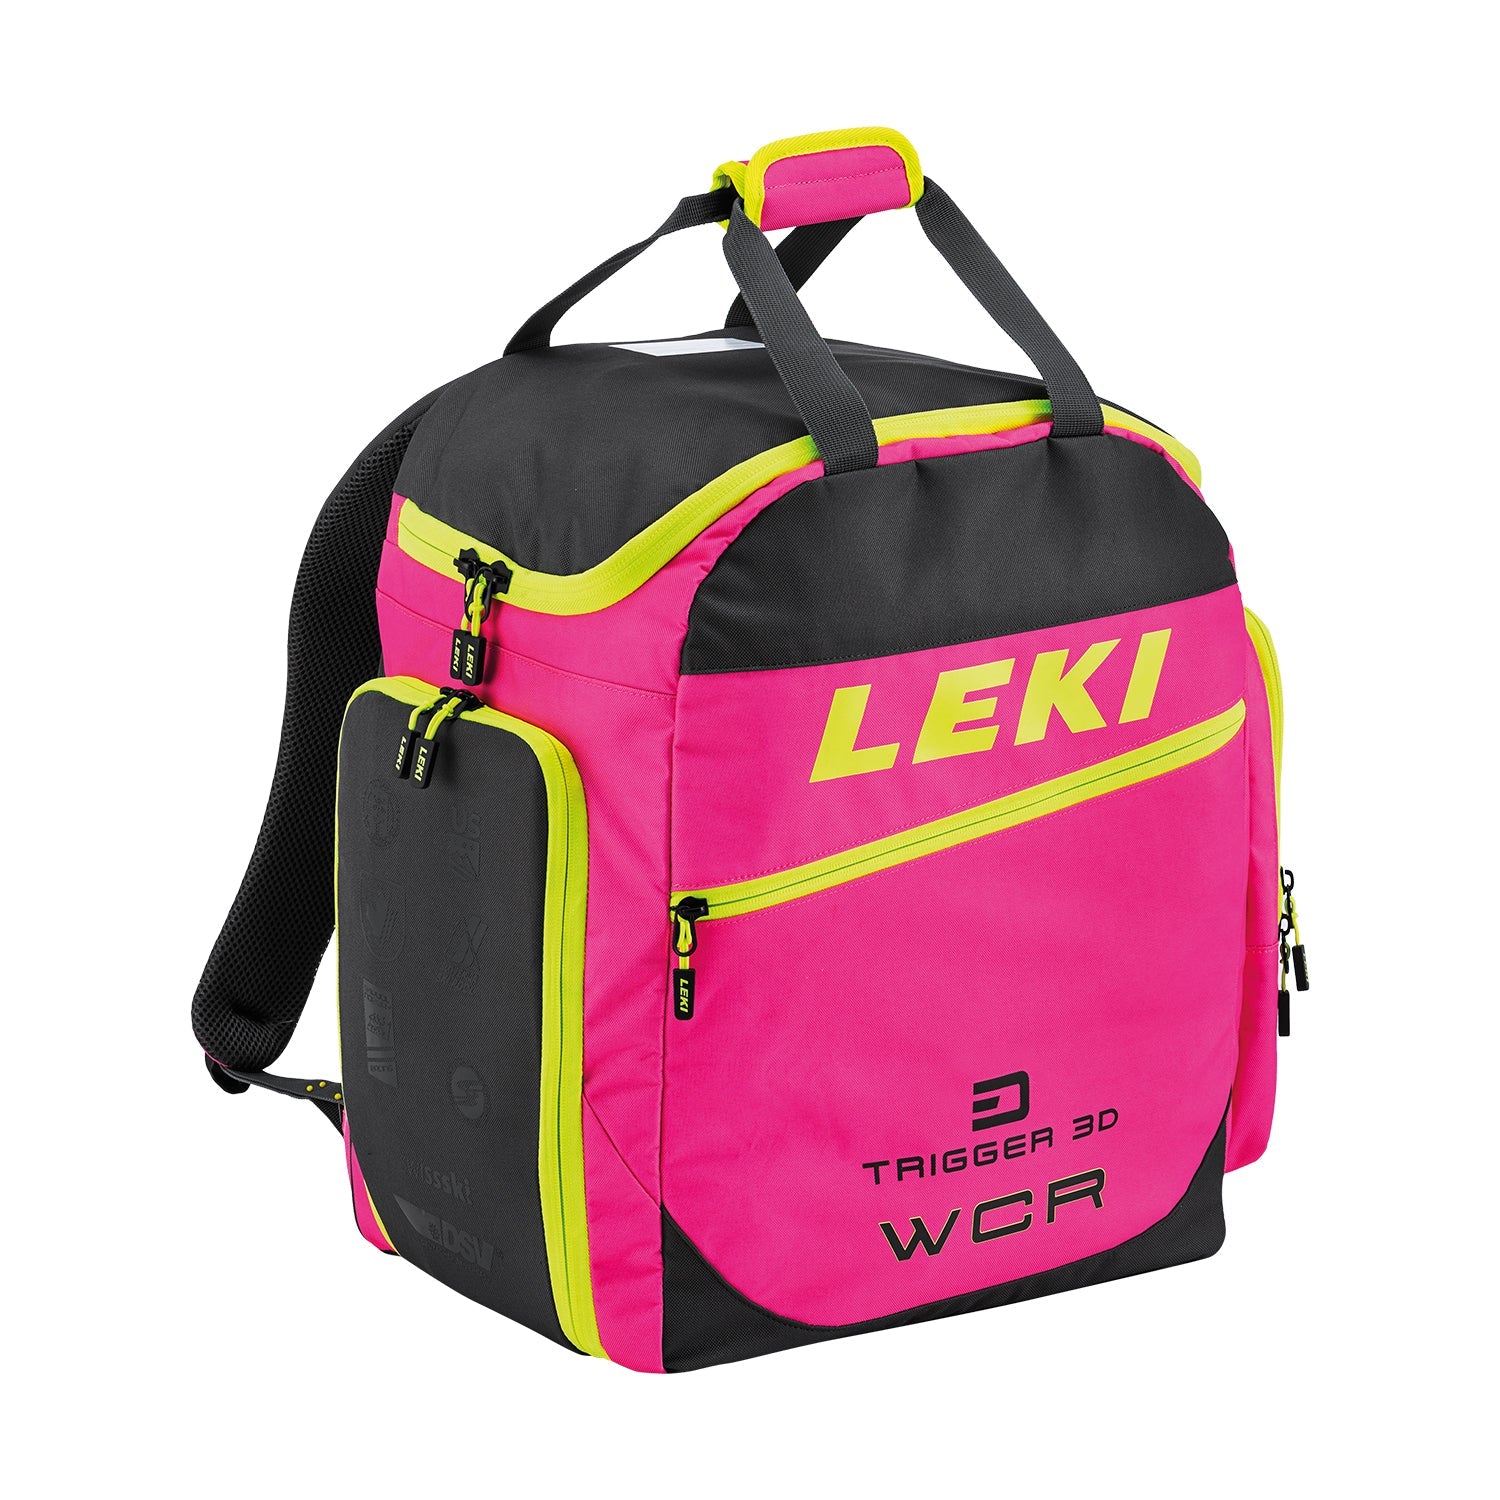 Ski and Snowboard Boot Bag Backpack - 60 L - Waterproof Winter Sport Pack for Travel Pink, Women's, Size: Large